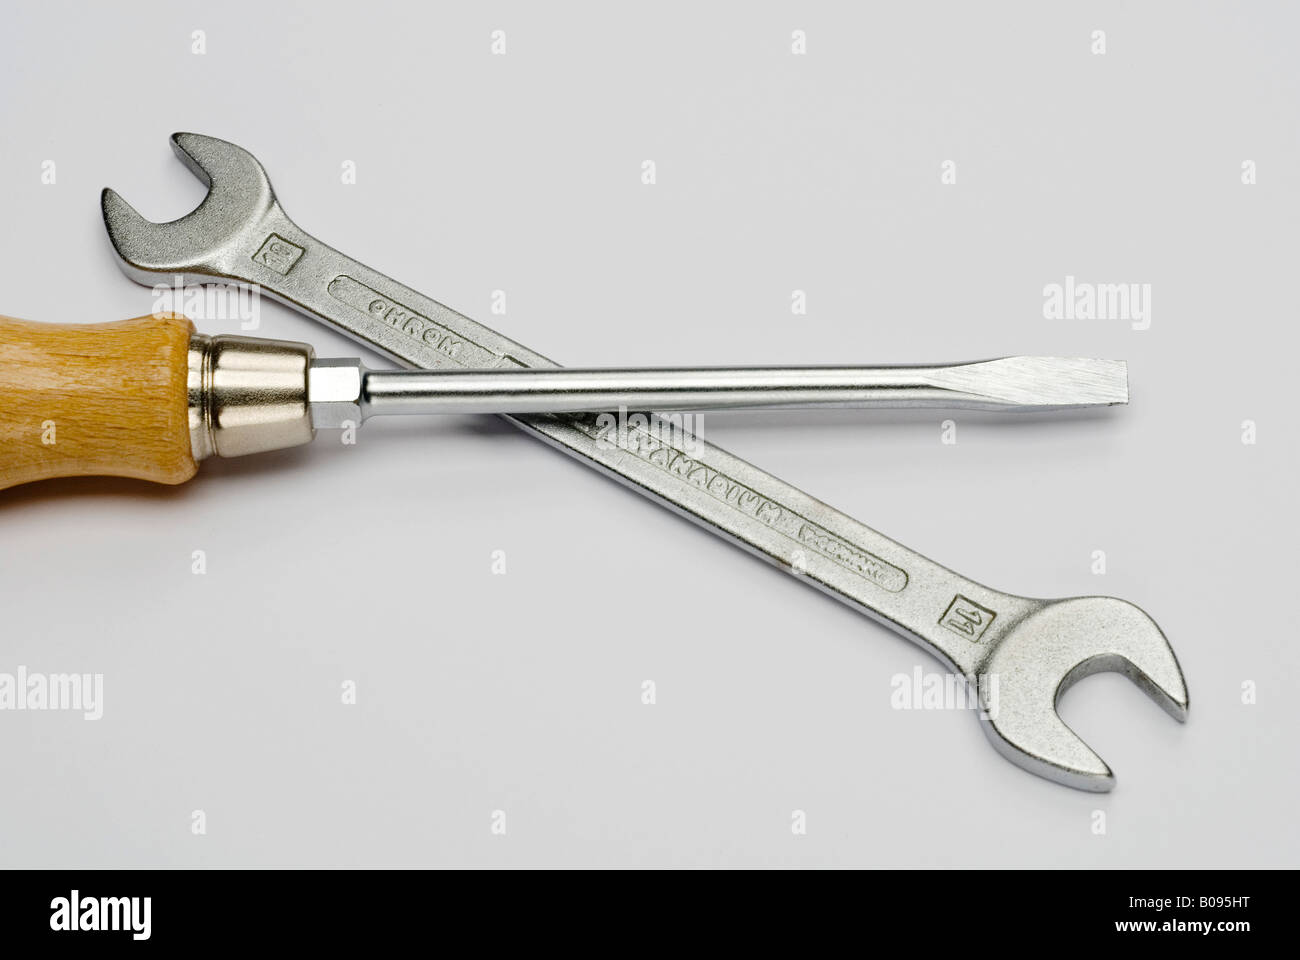 Screwdriver and wrench Stock Photo